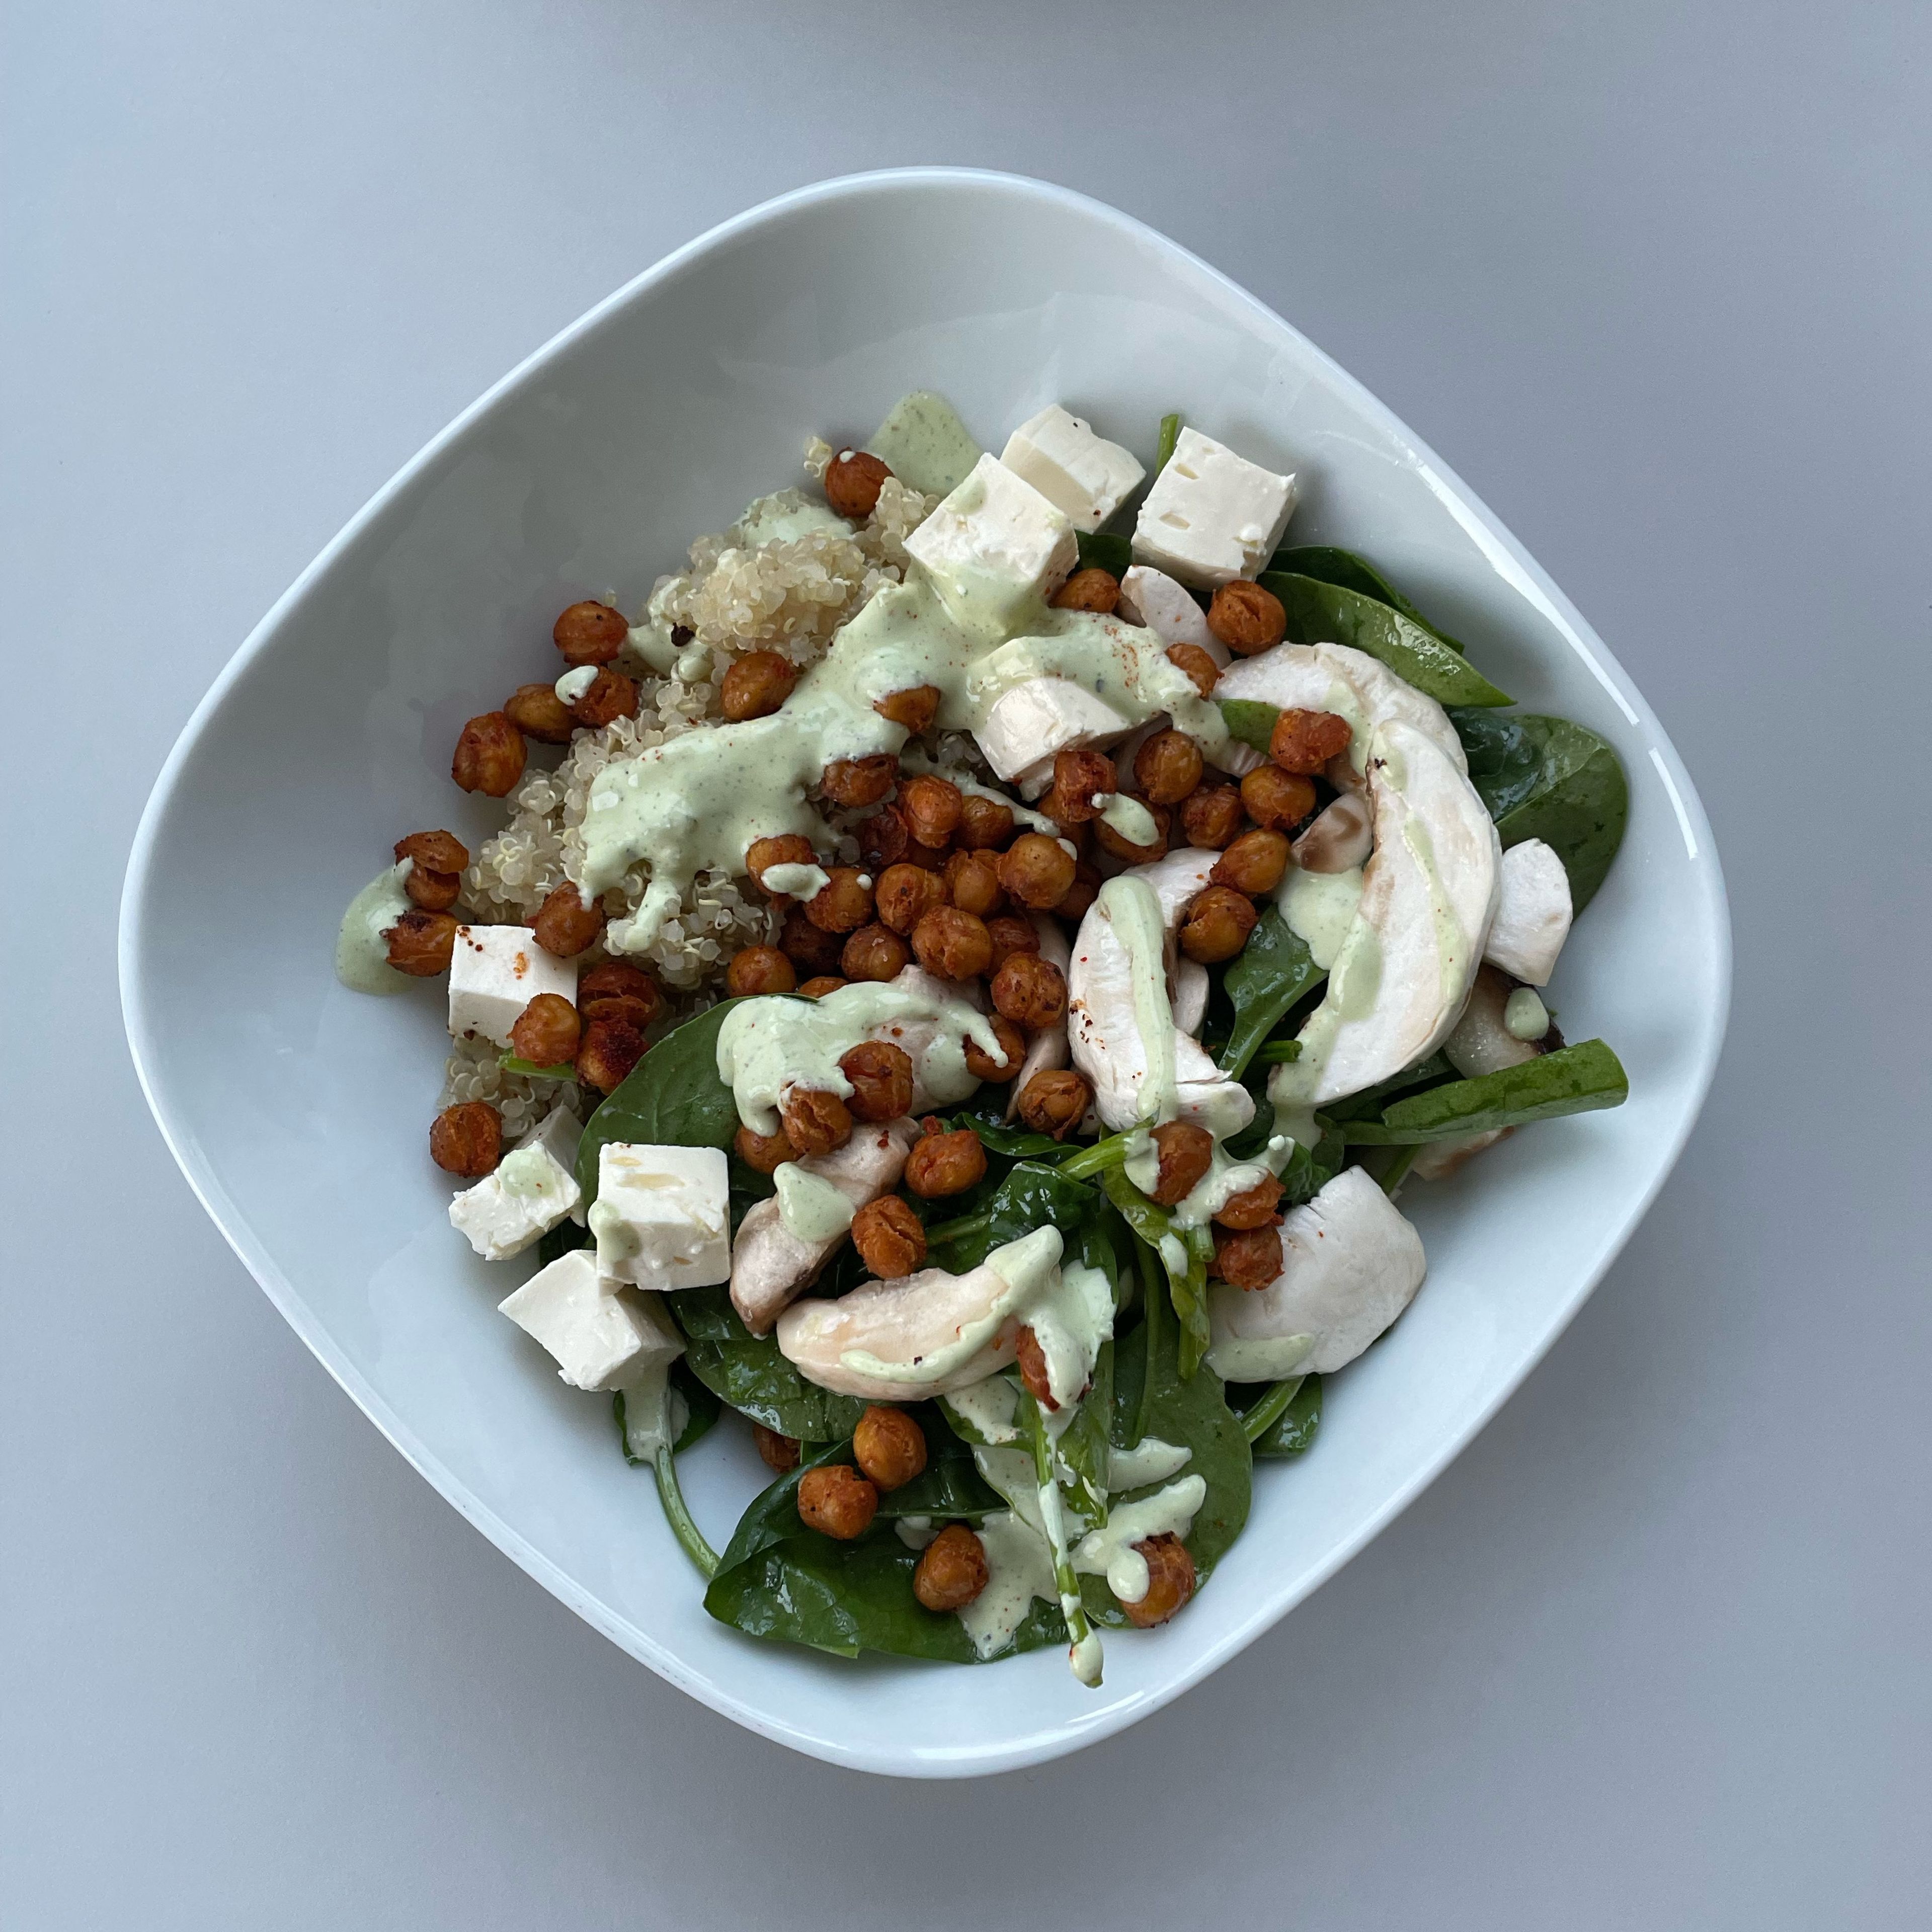 Add the cooked quinoa and spinach & mushroom salad to a bowl. Add the feta cheese you had previously set aside cut in cubes and the crunchy chickpeas. Top it with the lemony feta dressing sauce and enjoy!